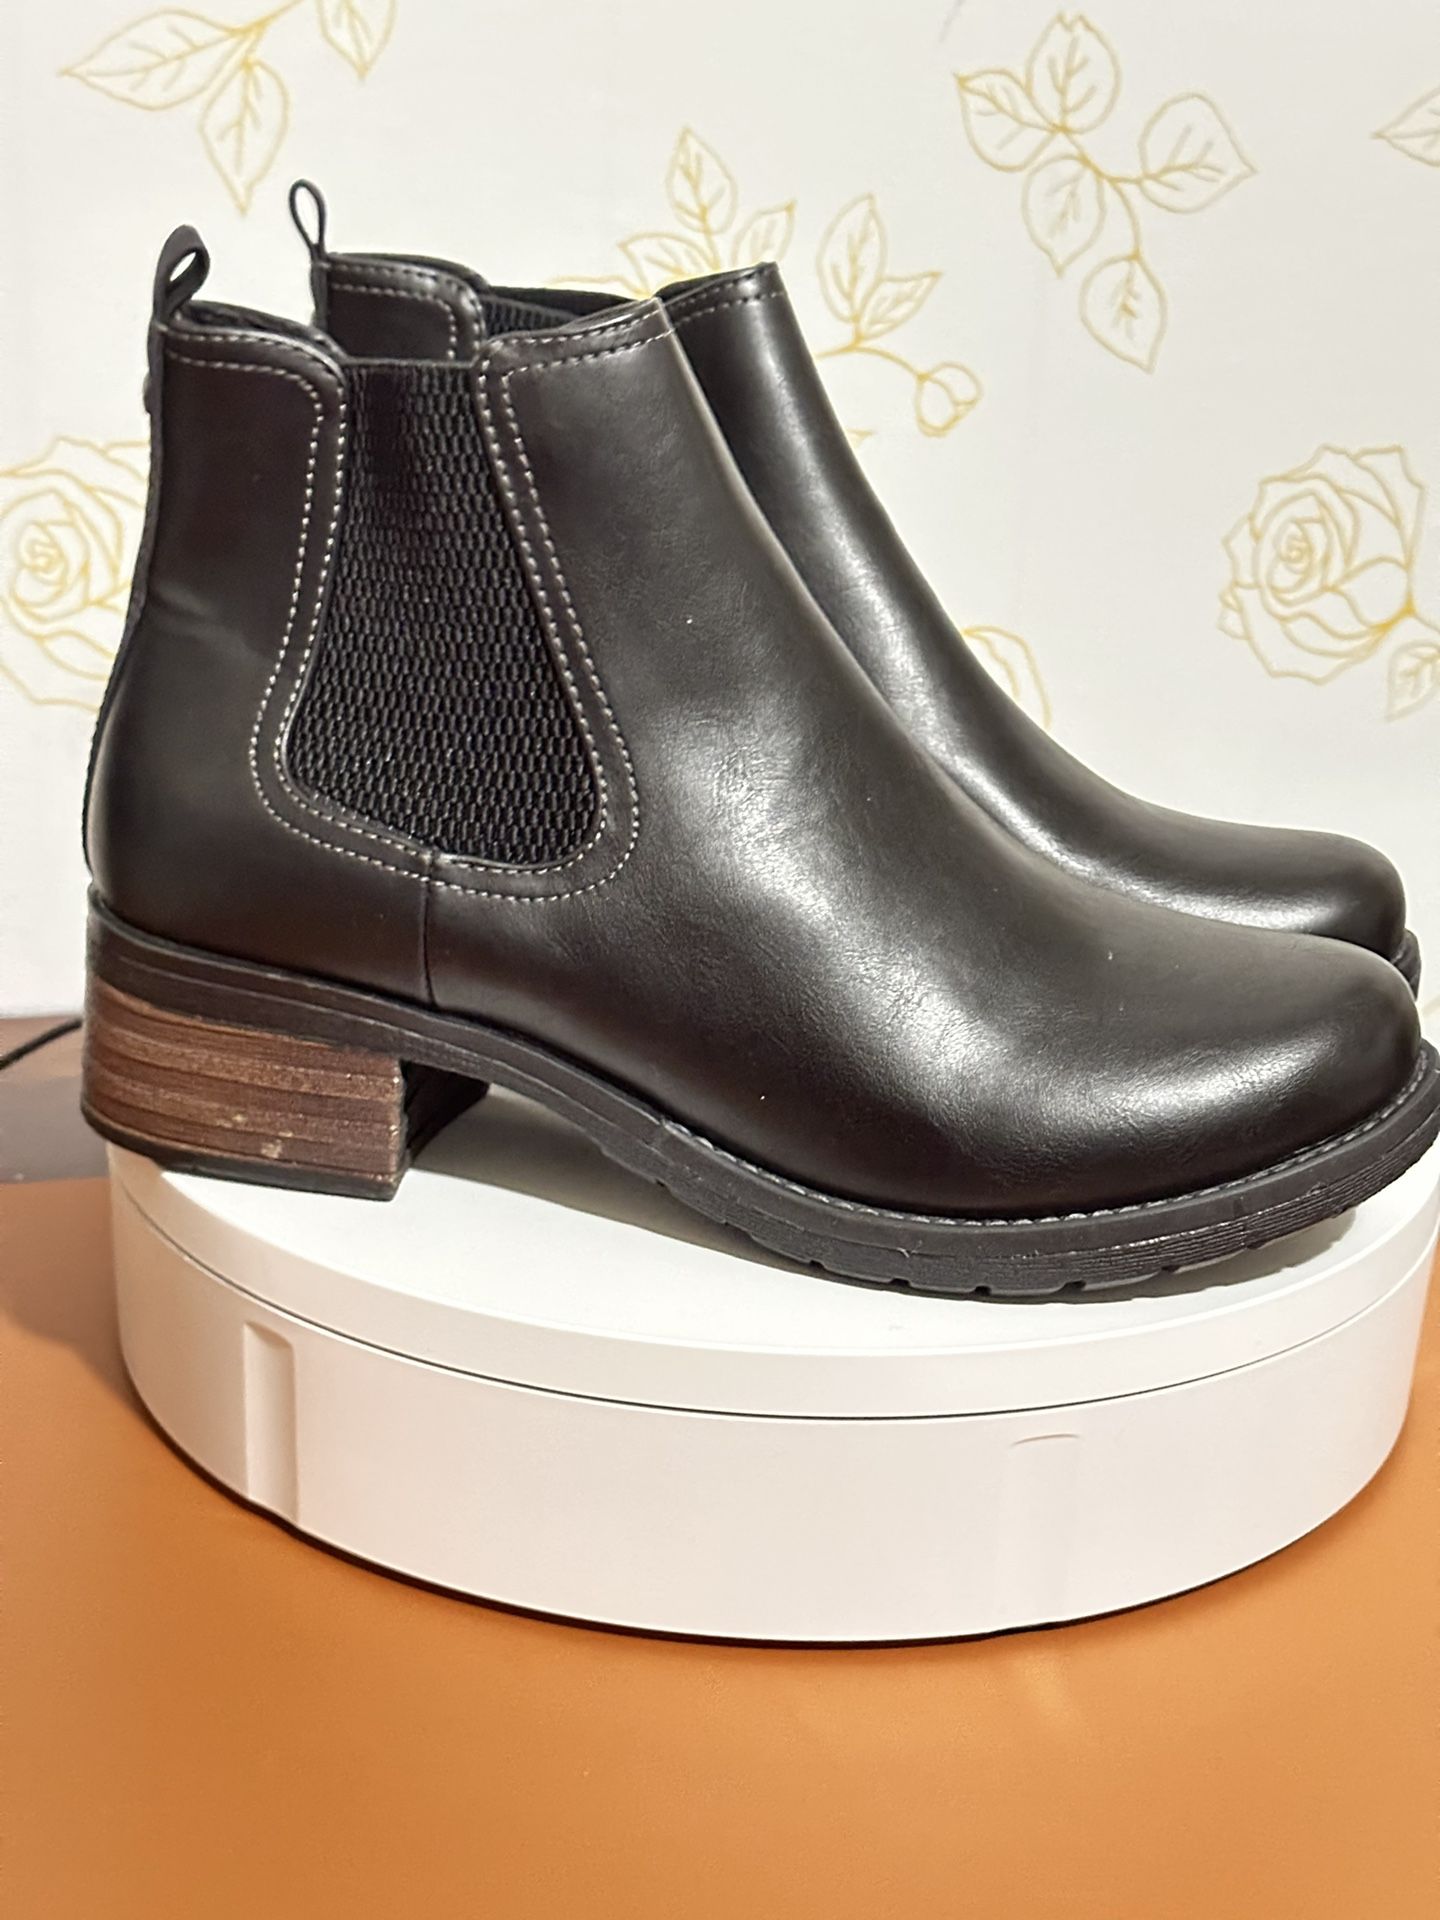 Eastland Black Leather Ankle Boots